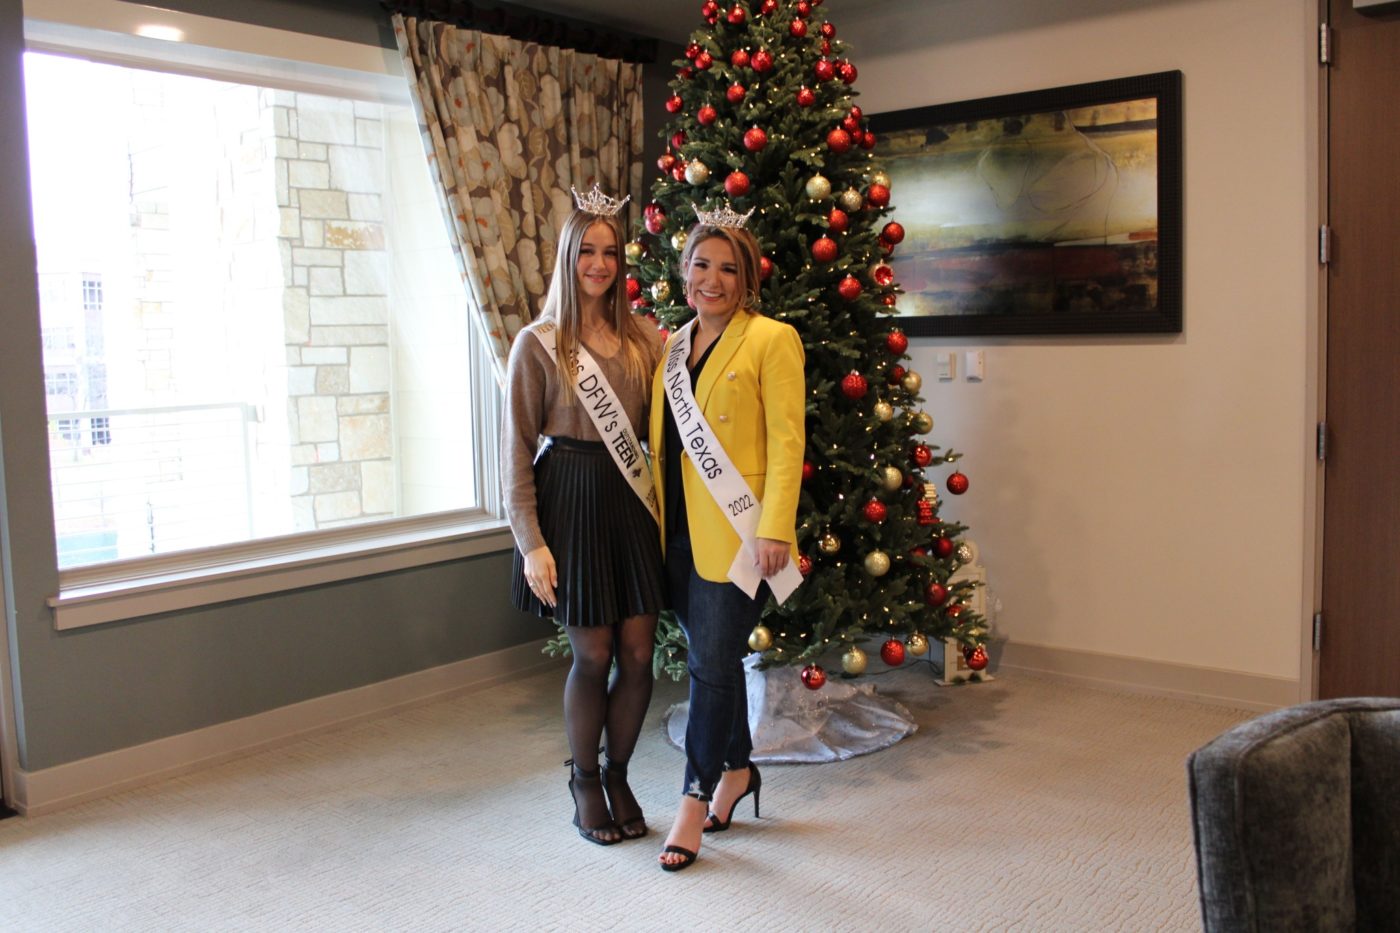 Miss North Texas and Miss DFW Outstanding Teen Visit The T. Boone Pickens Hospice Center